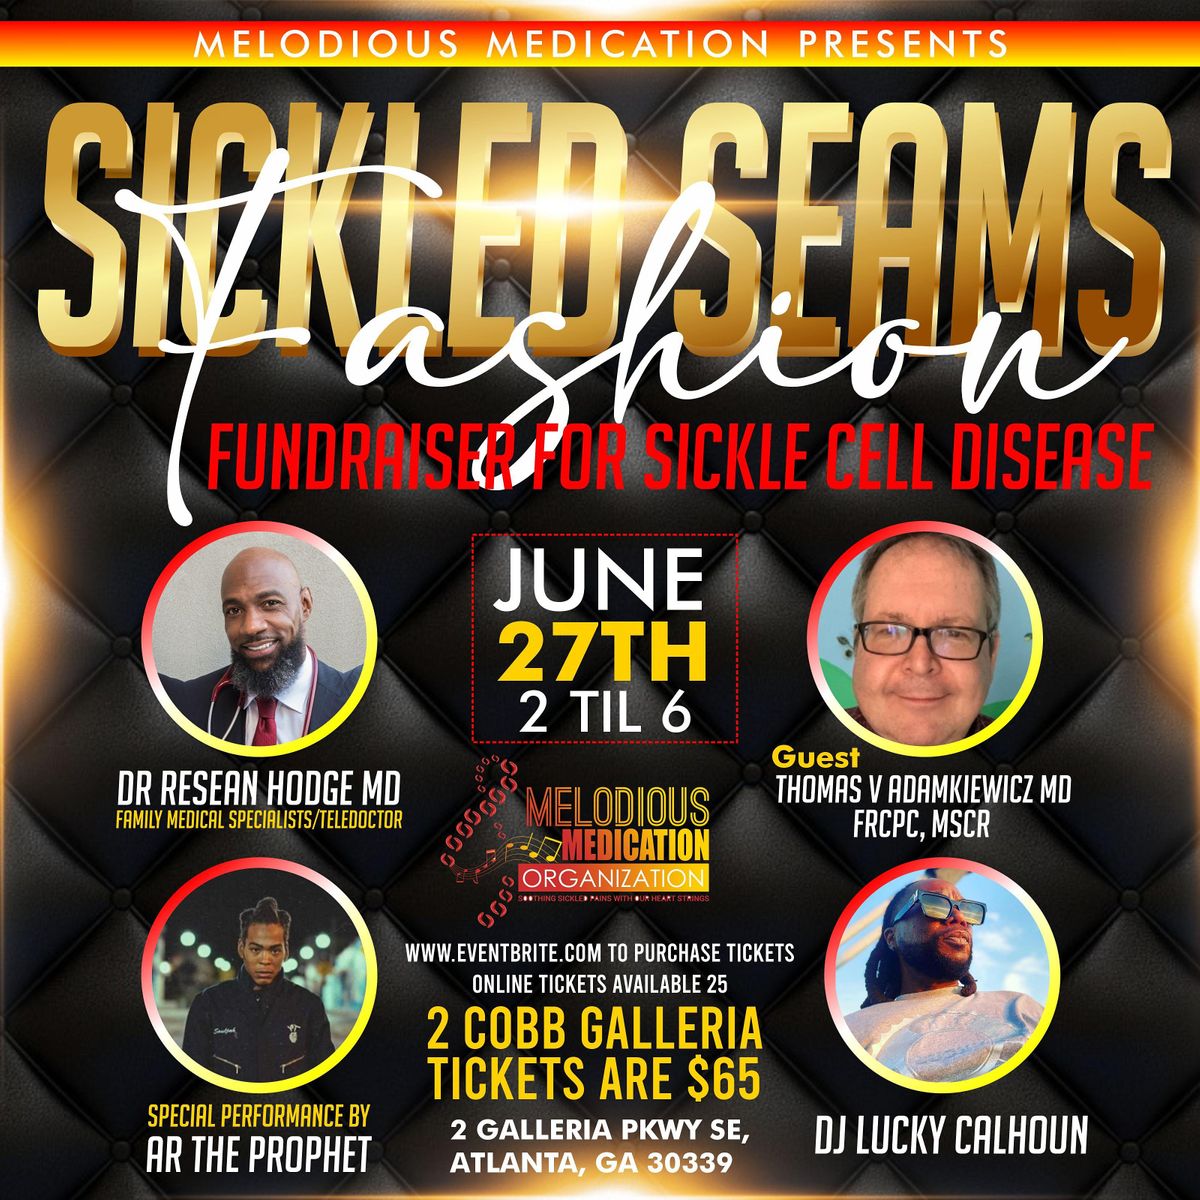 Melodious Medic*tion Presents Sickled Seams -Fashion Show Fundraiser